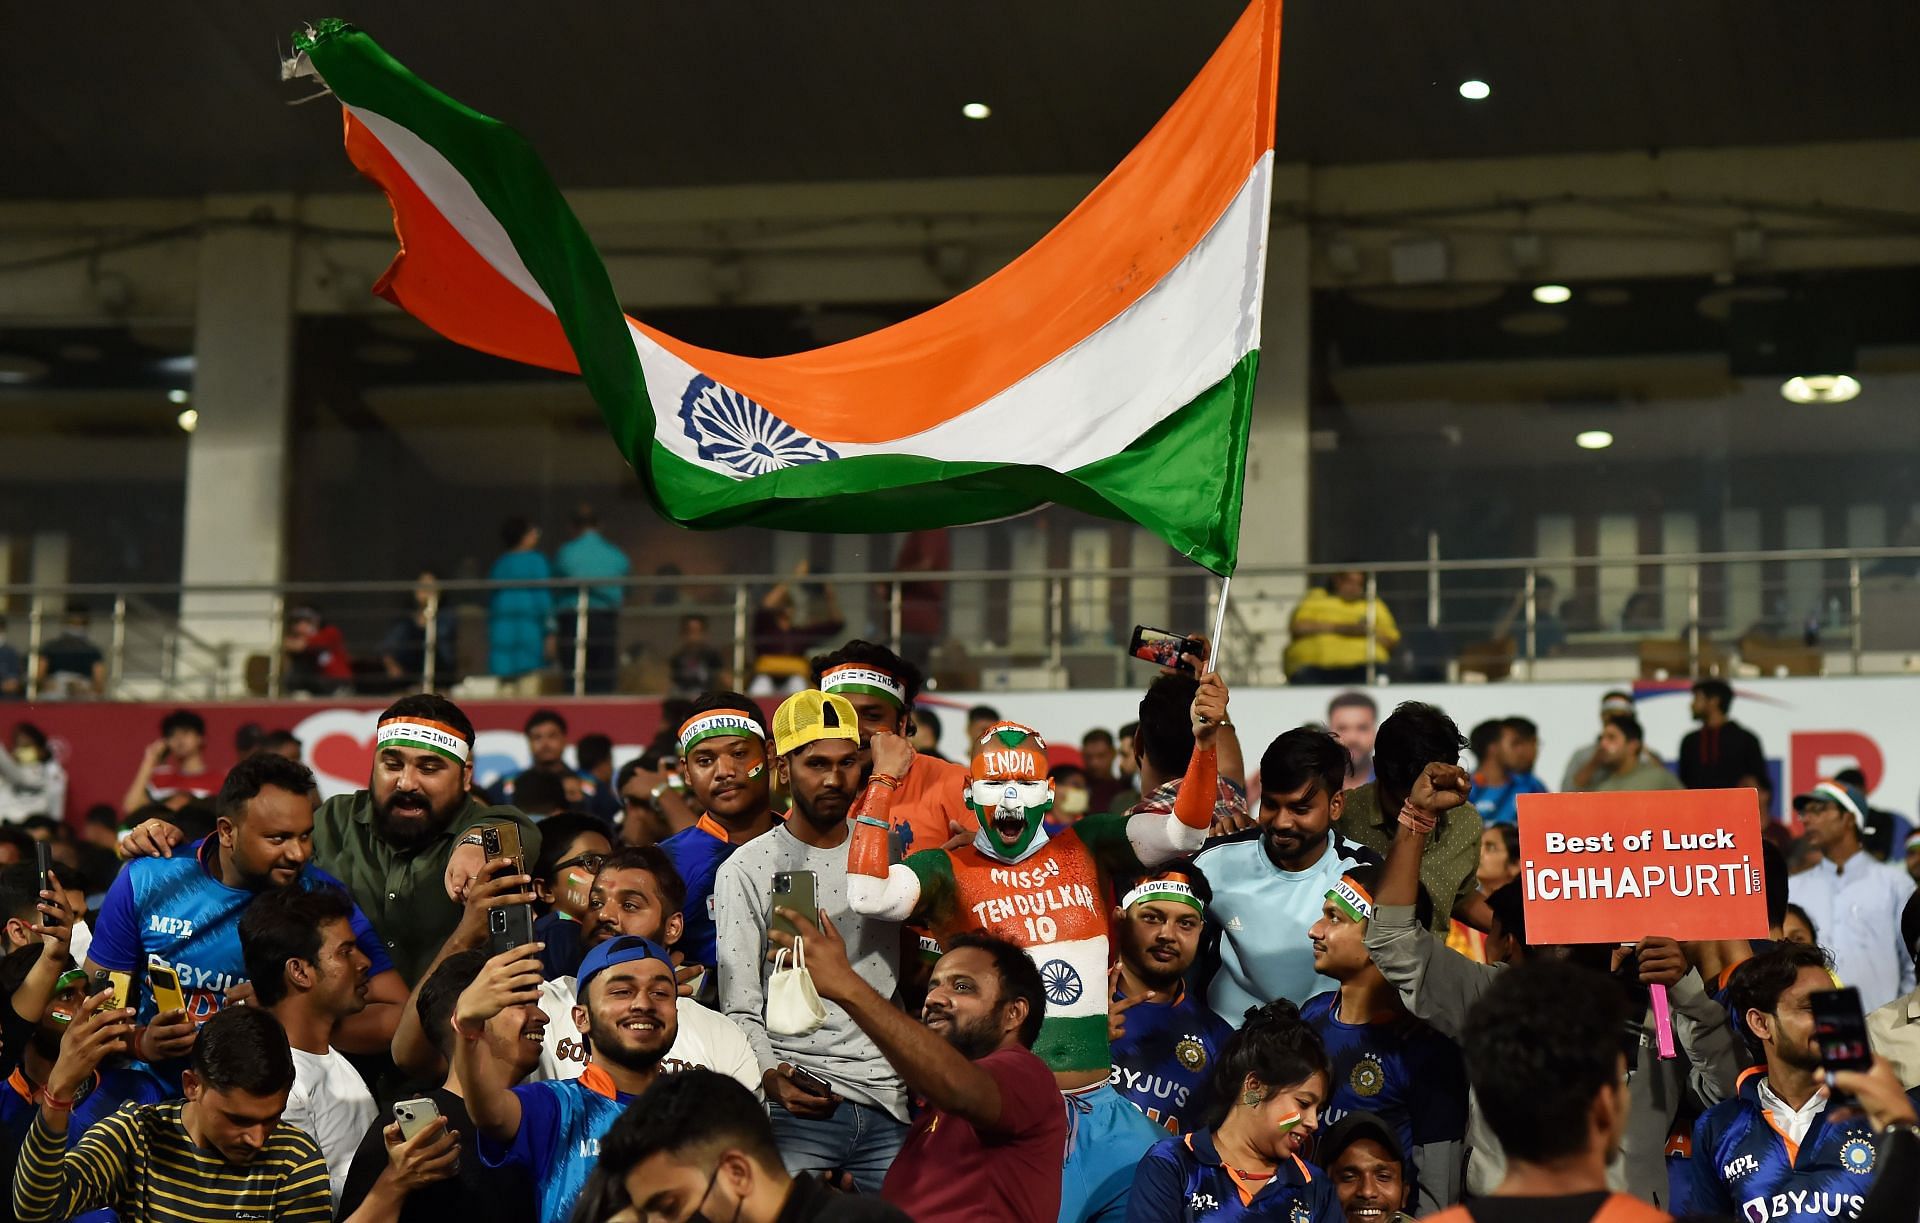 Fans at the Eden Gardens cheer during an India v New Zealand T20 International